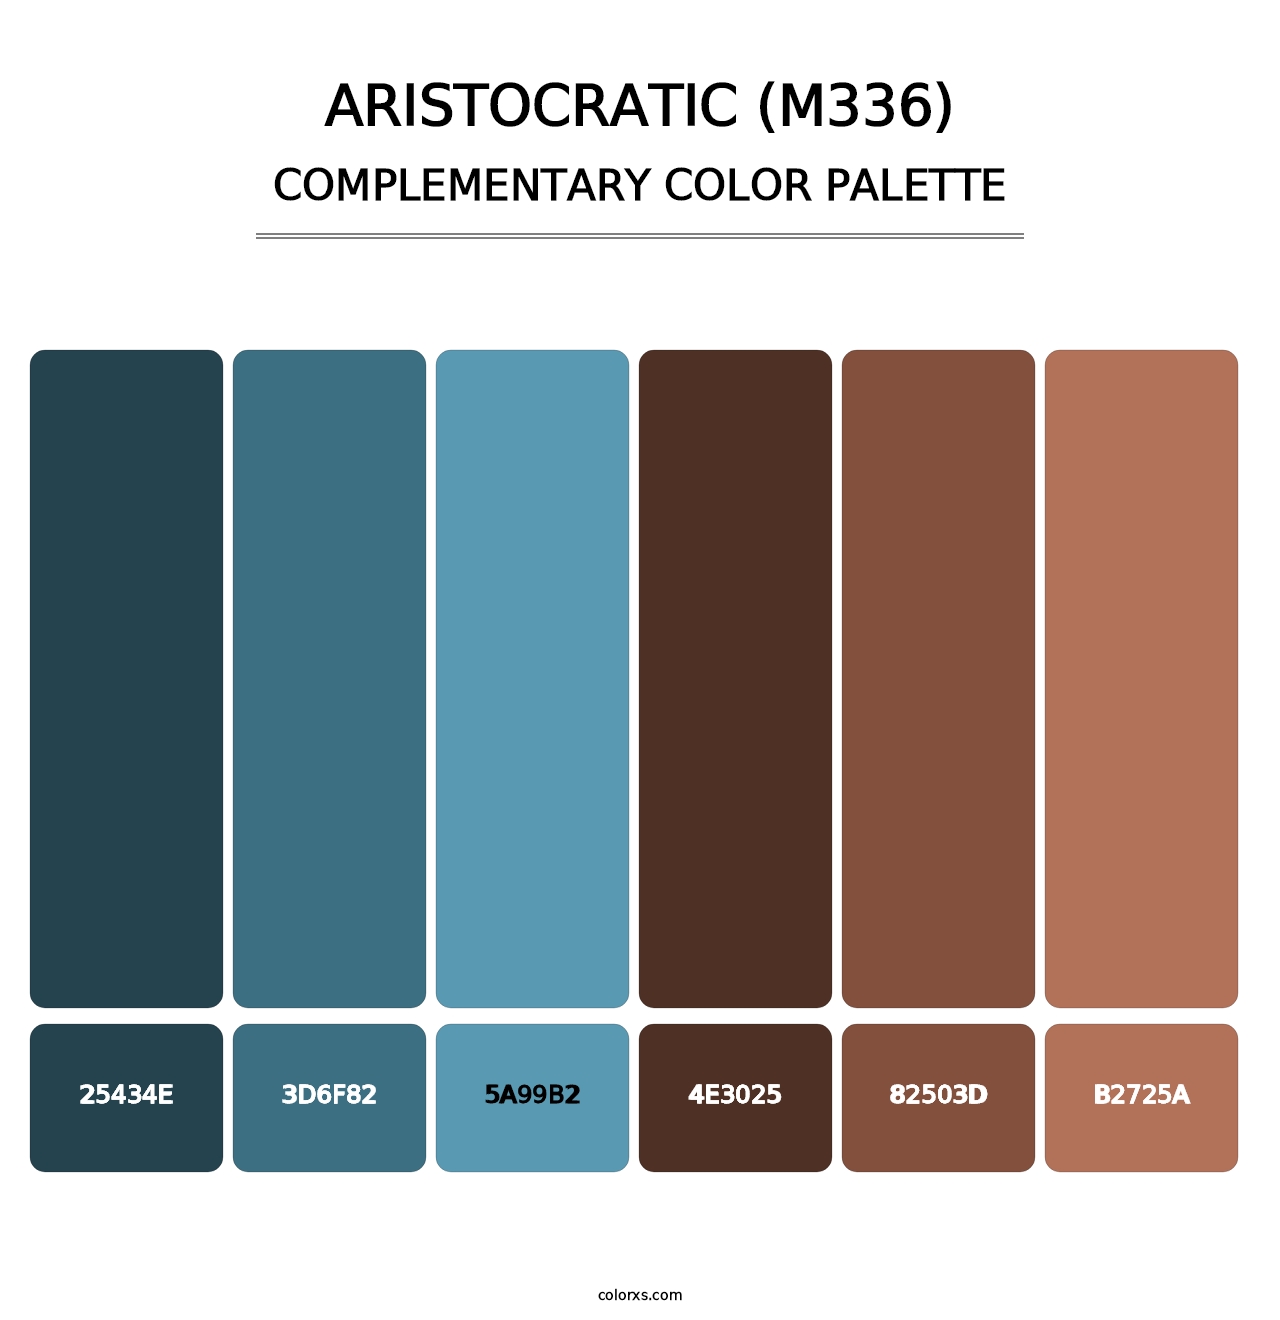 Aristocratic (M336) - Complementary Color Palette